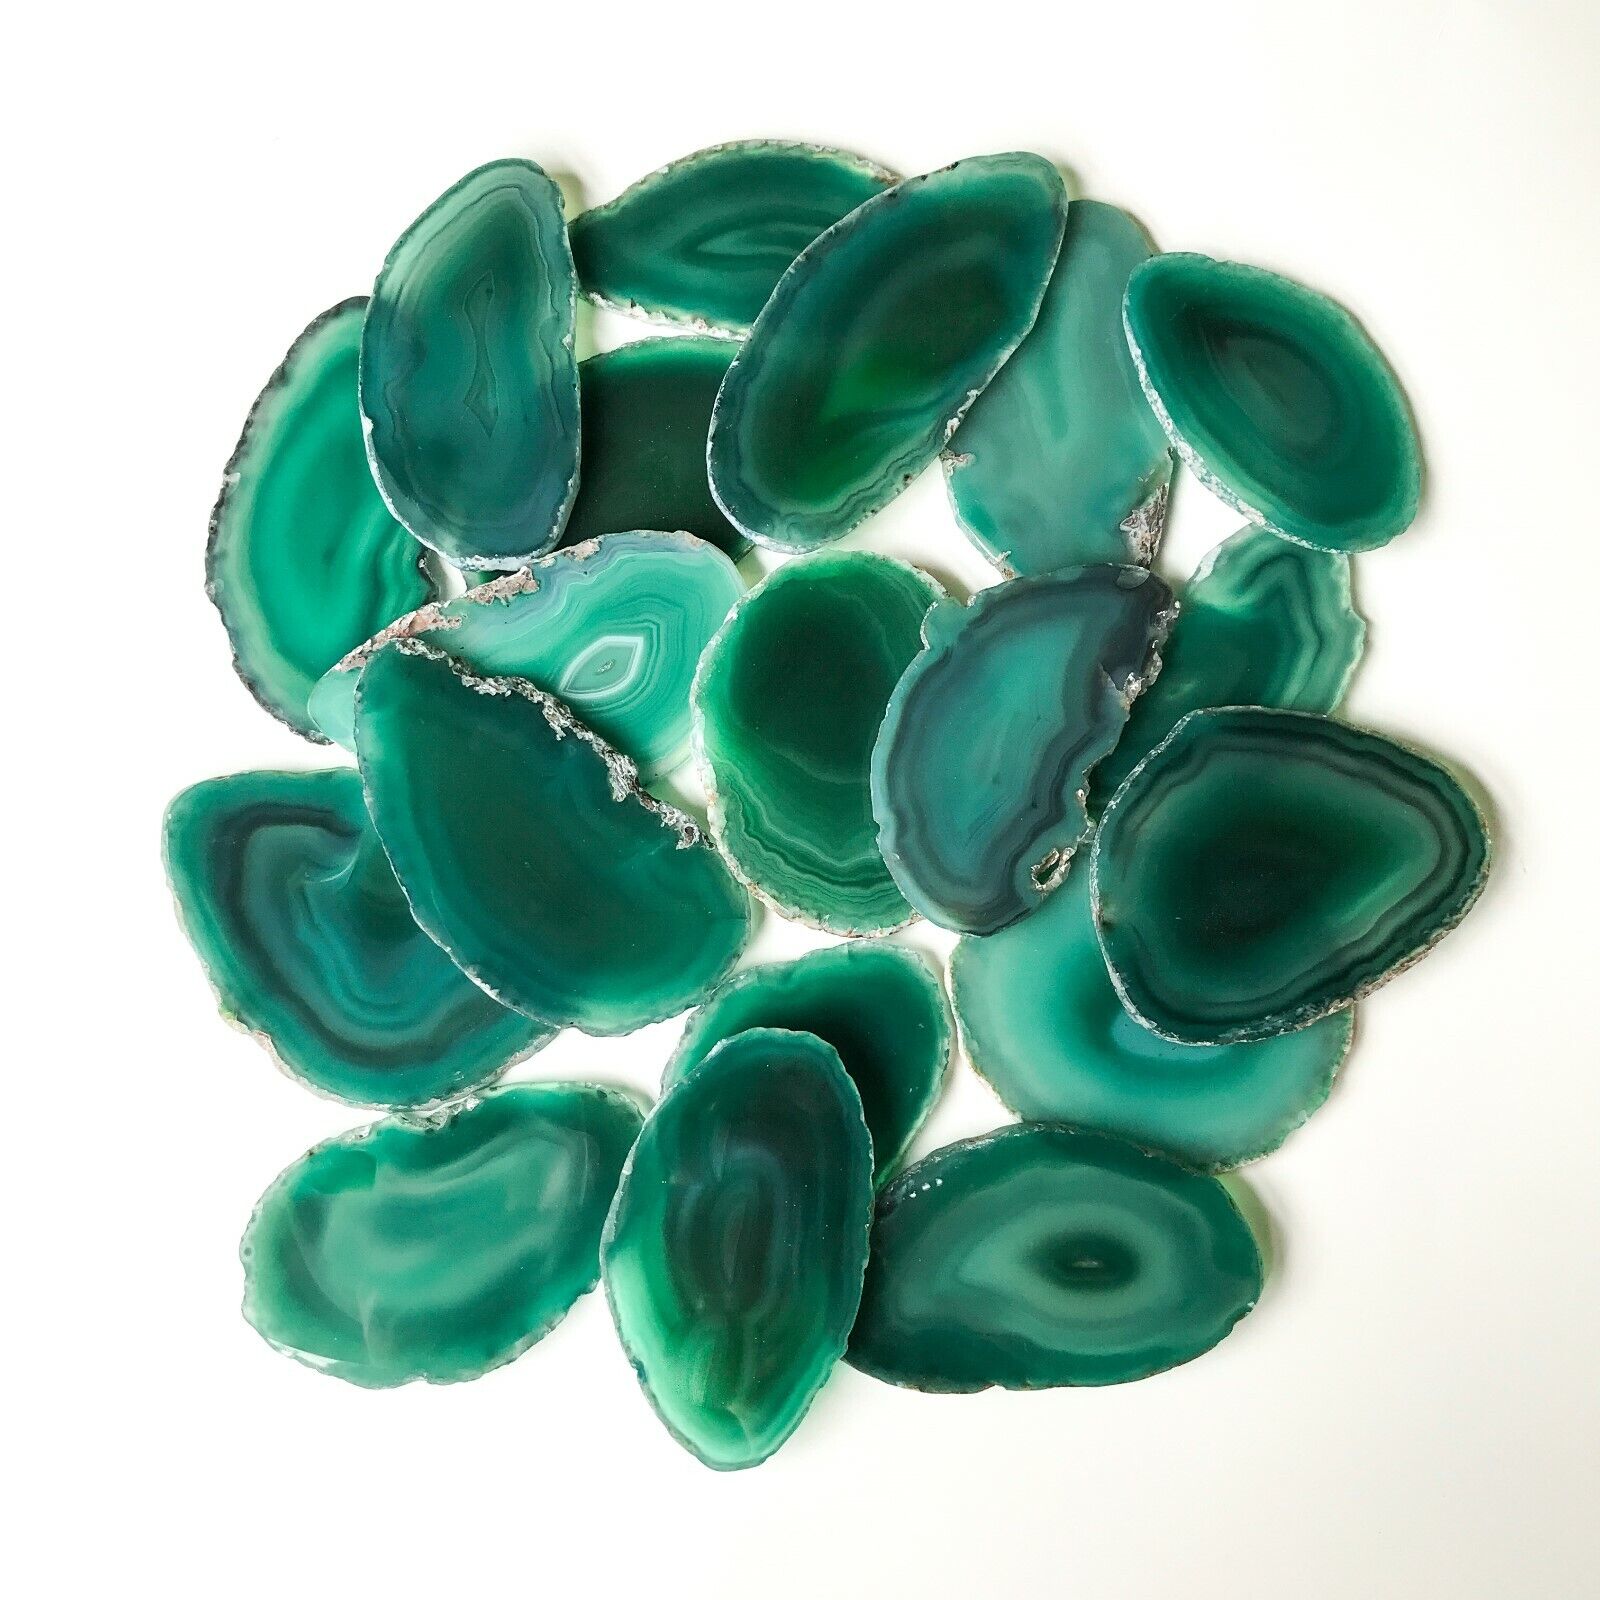 Green Agate Slices: 2.5-3.75